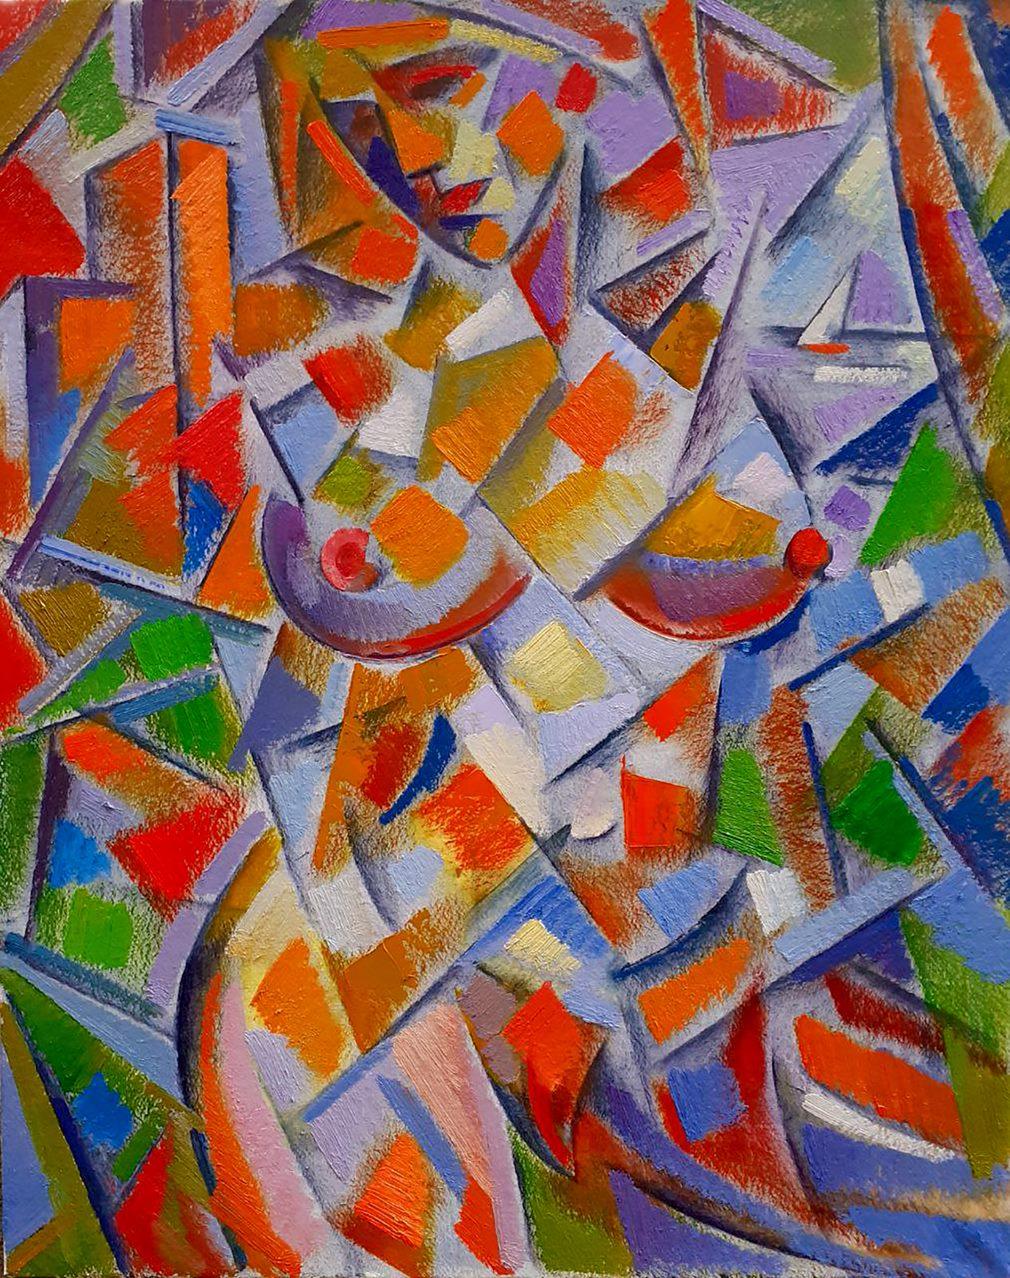 Artist: Peter Tovpev
Work: Original oil painting, handmade artwork, one of a kind 
Medium: Oil on Canvas 
Year: 2022
Style: Cubism
Title: Nude Woman
Size: 36.5